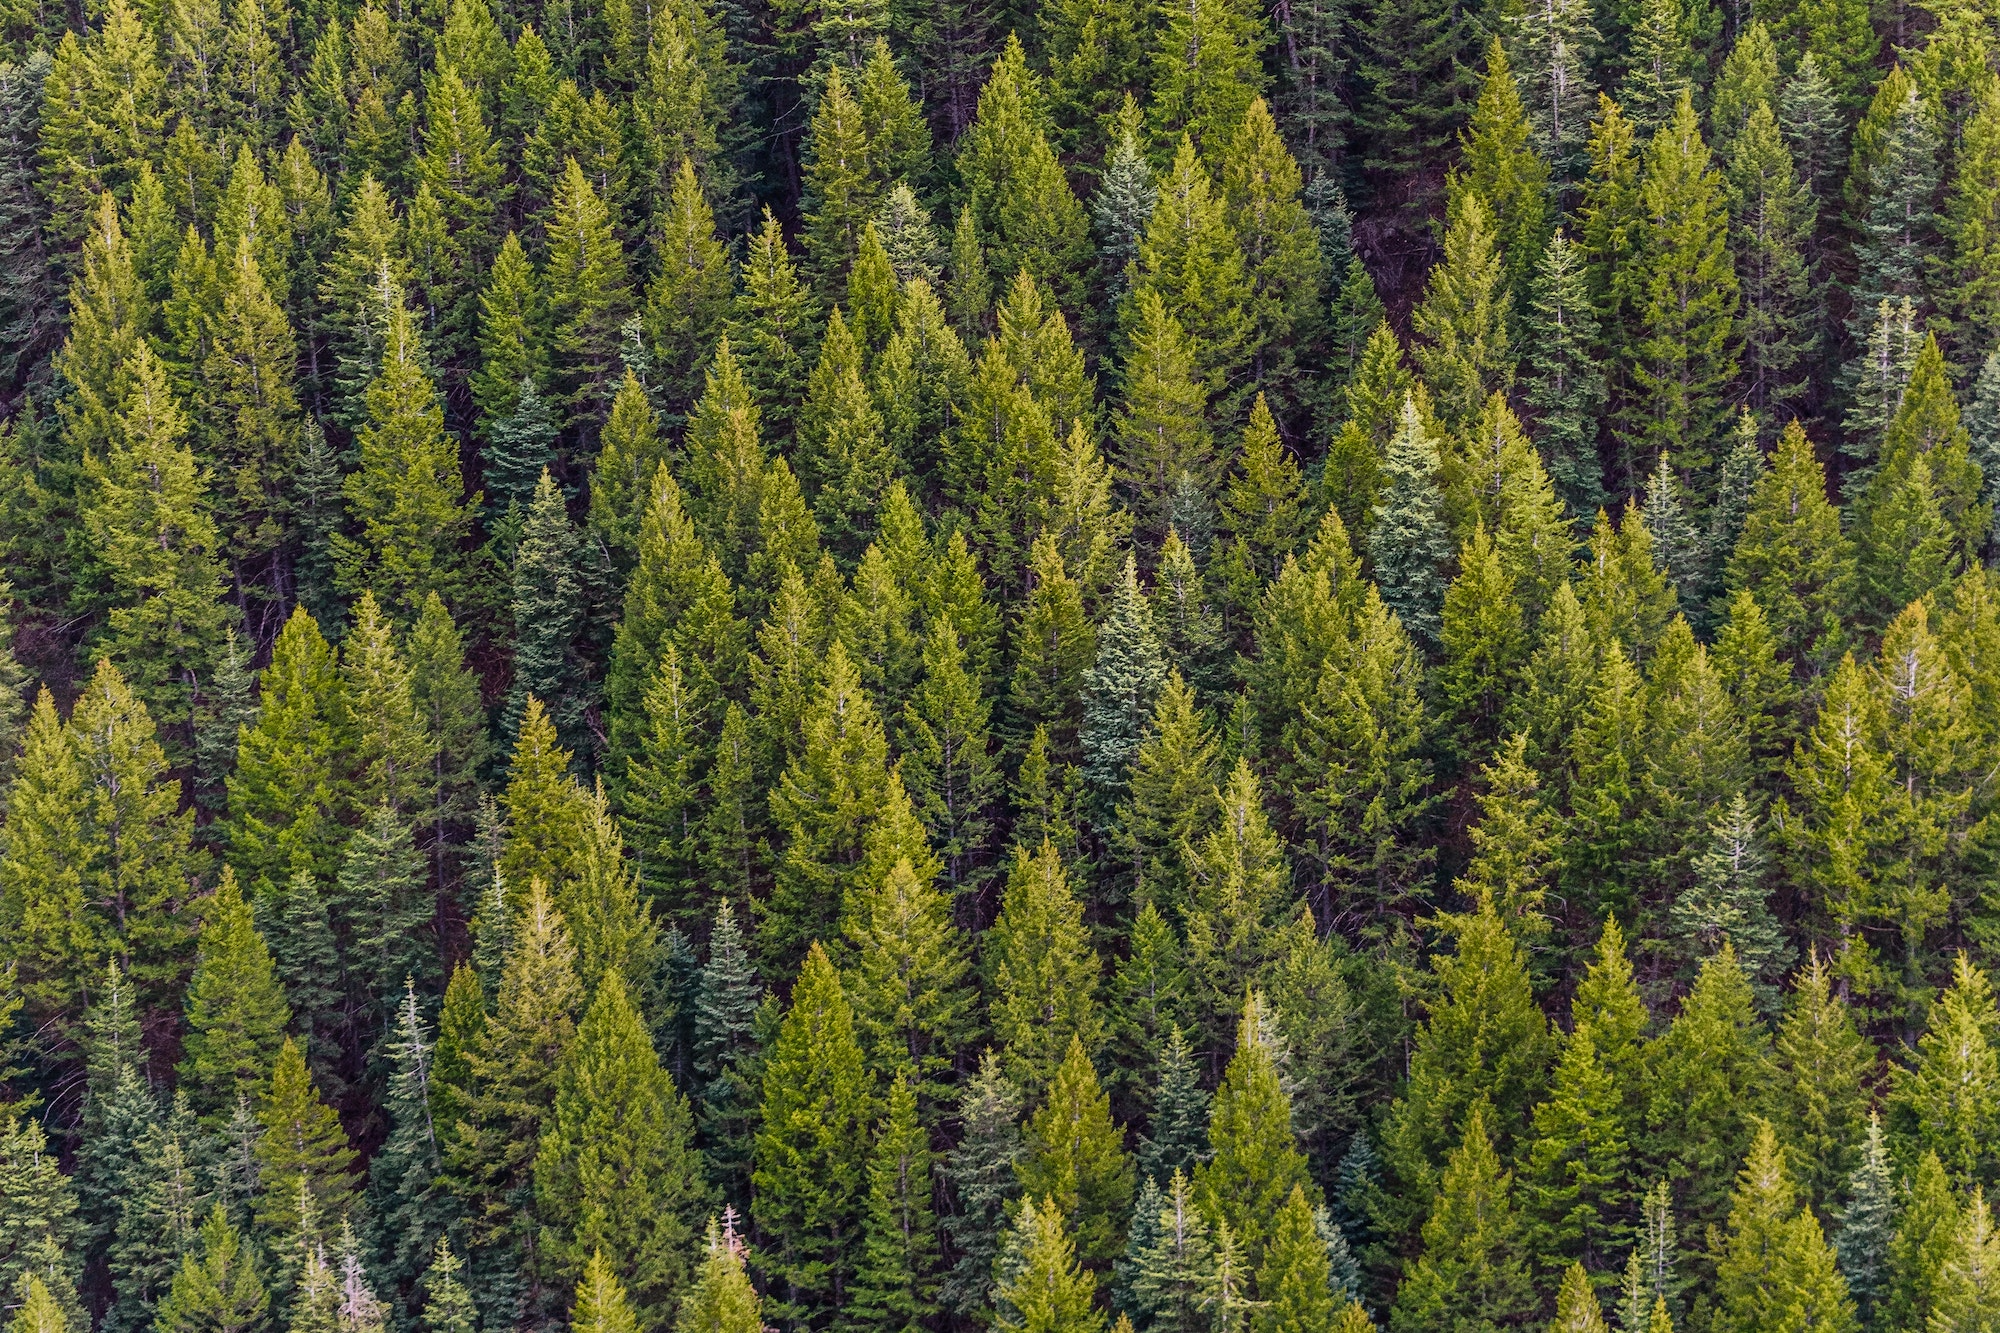 A forest of pine trees.